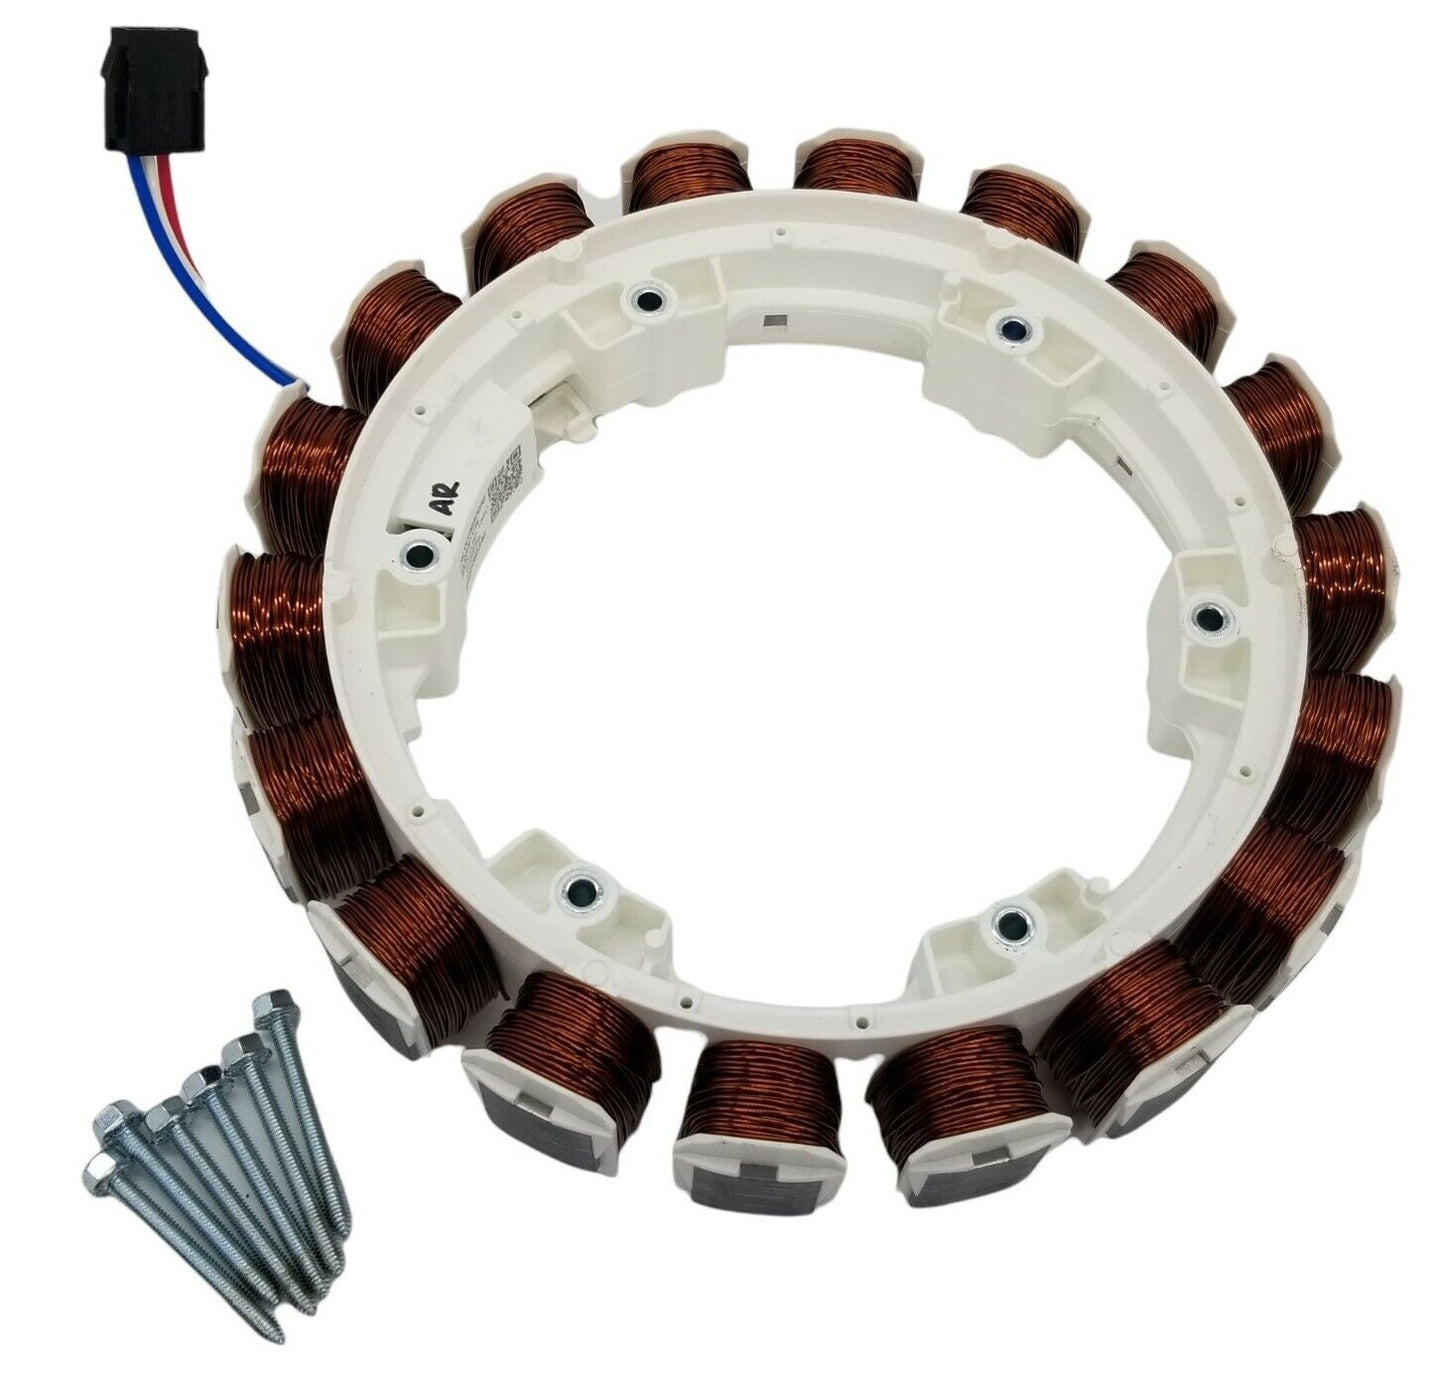 OEM Replacement for Whirlpool Washer Stator W10897050